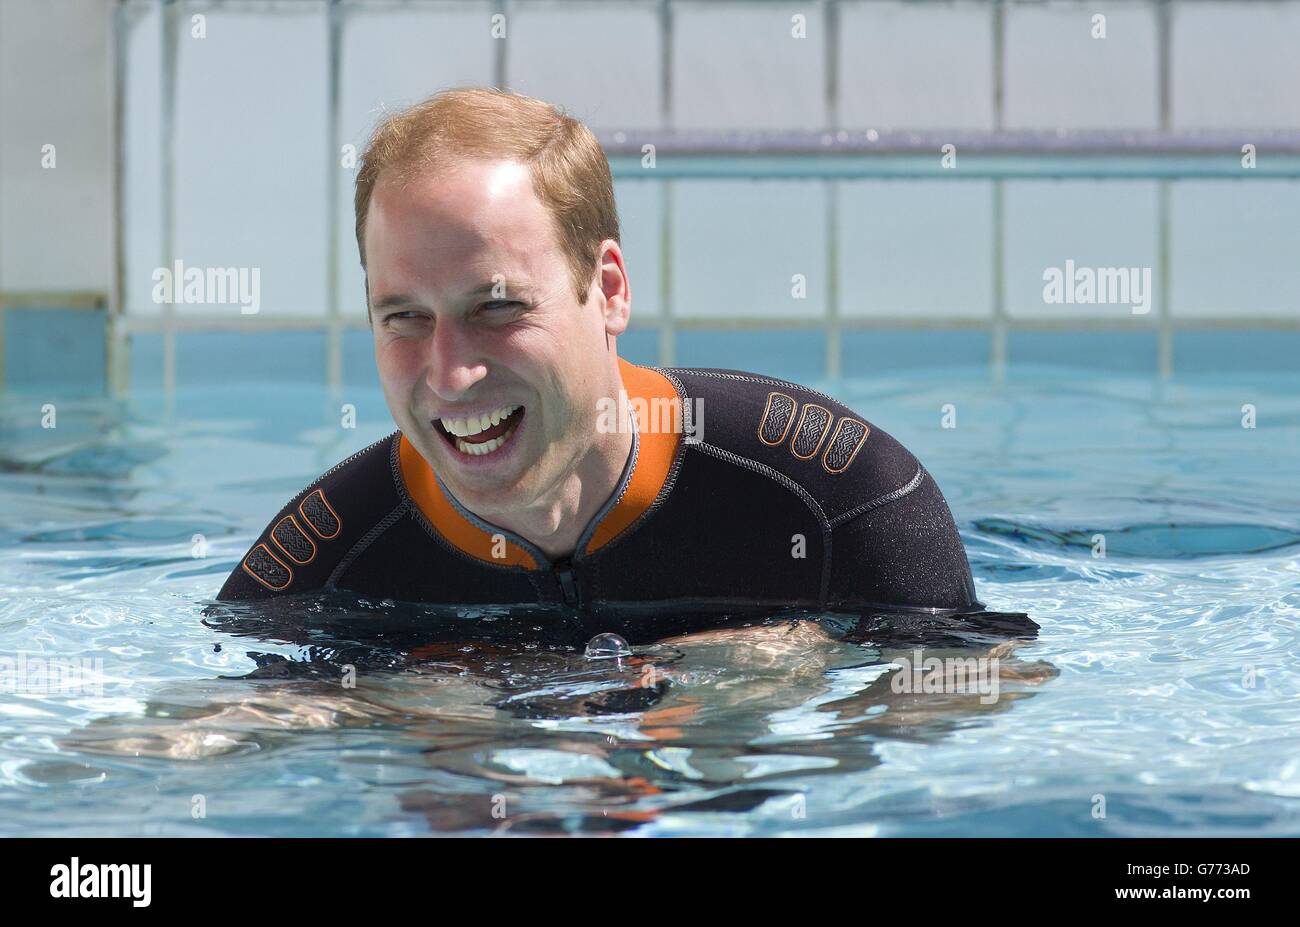 The Duke of Cambridge as he prepares to snorkel with British Sub-Aqua Club (BSAC) members at a swimming pool in London. Stock Photo